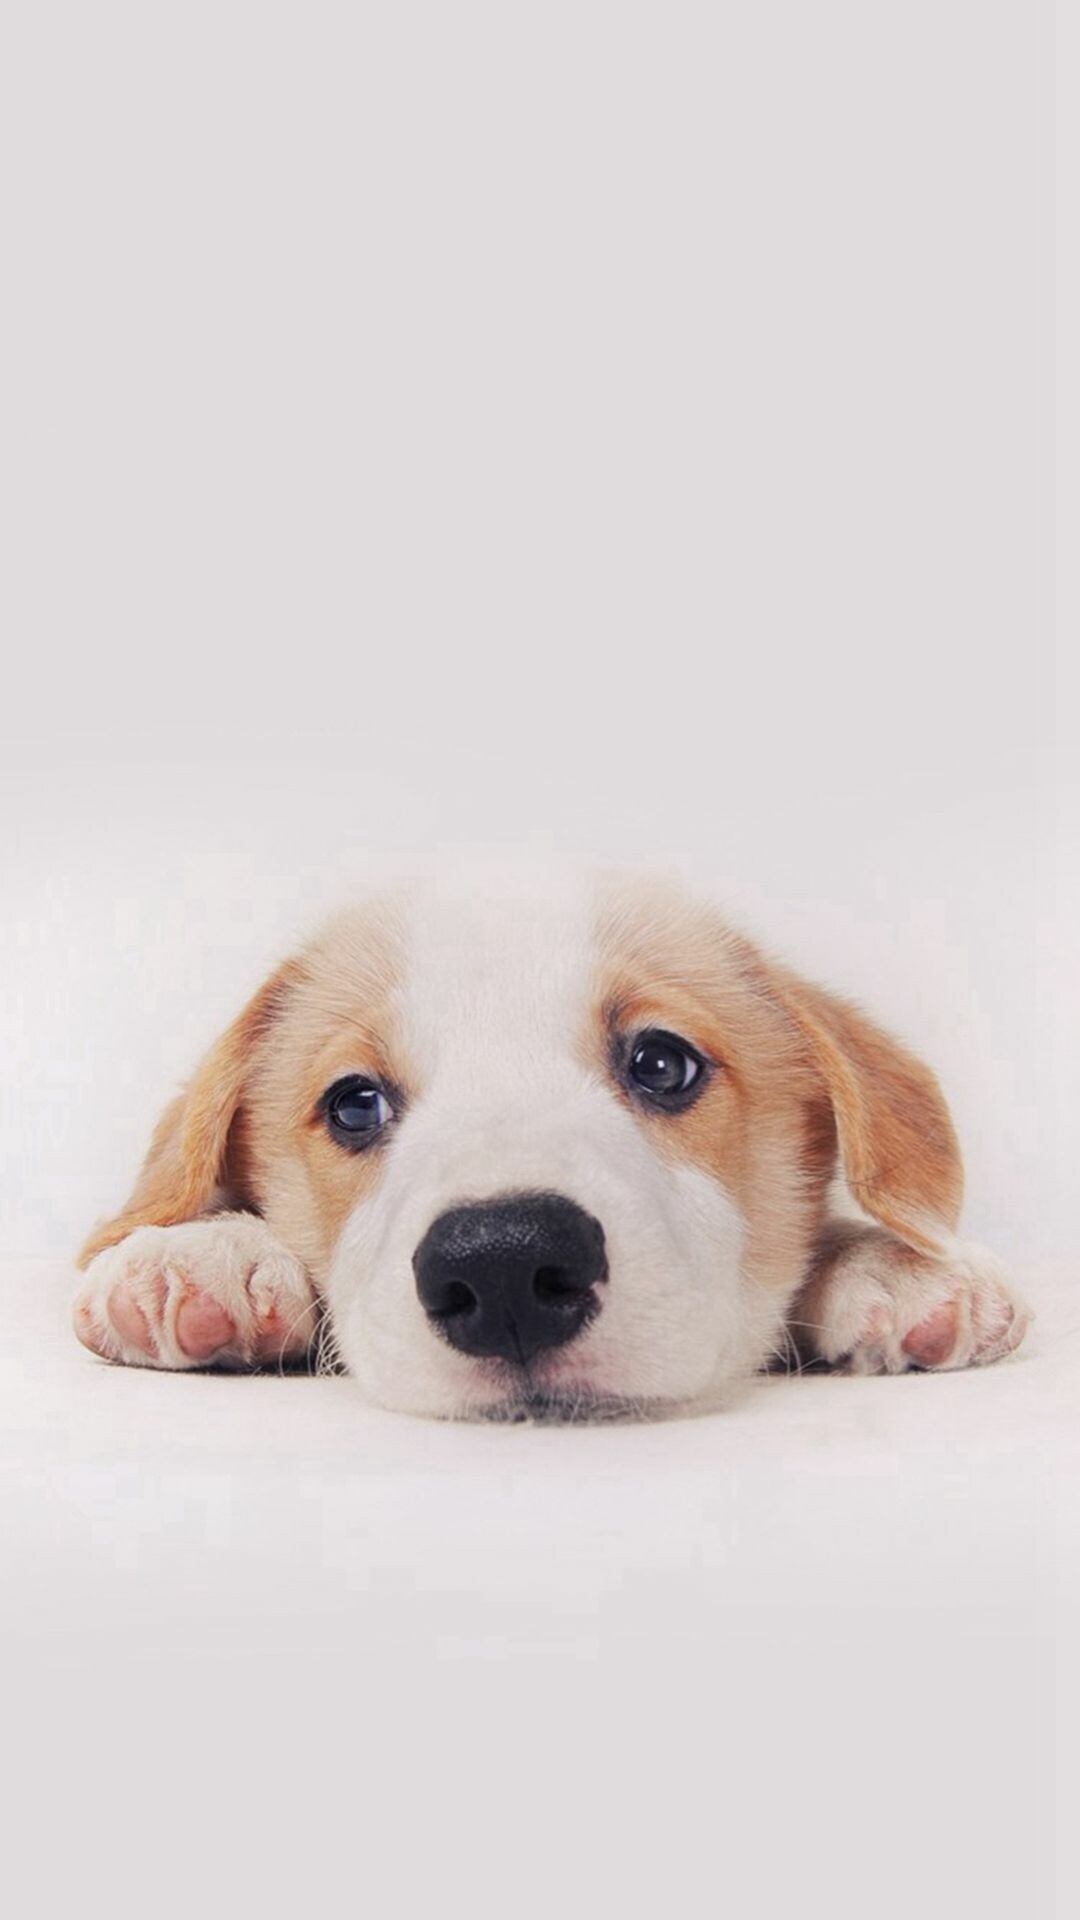 Puppy: Referred to as "man's best friend, A baby dog. 1080x1920 Full HD Wallpaper.